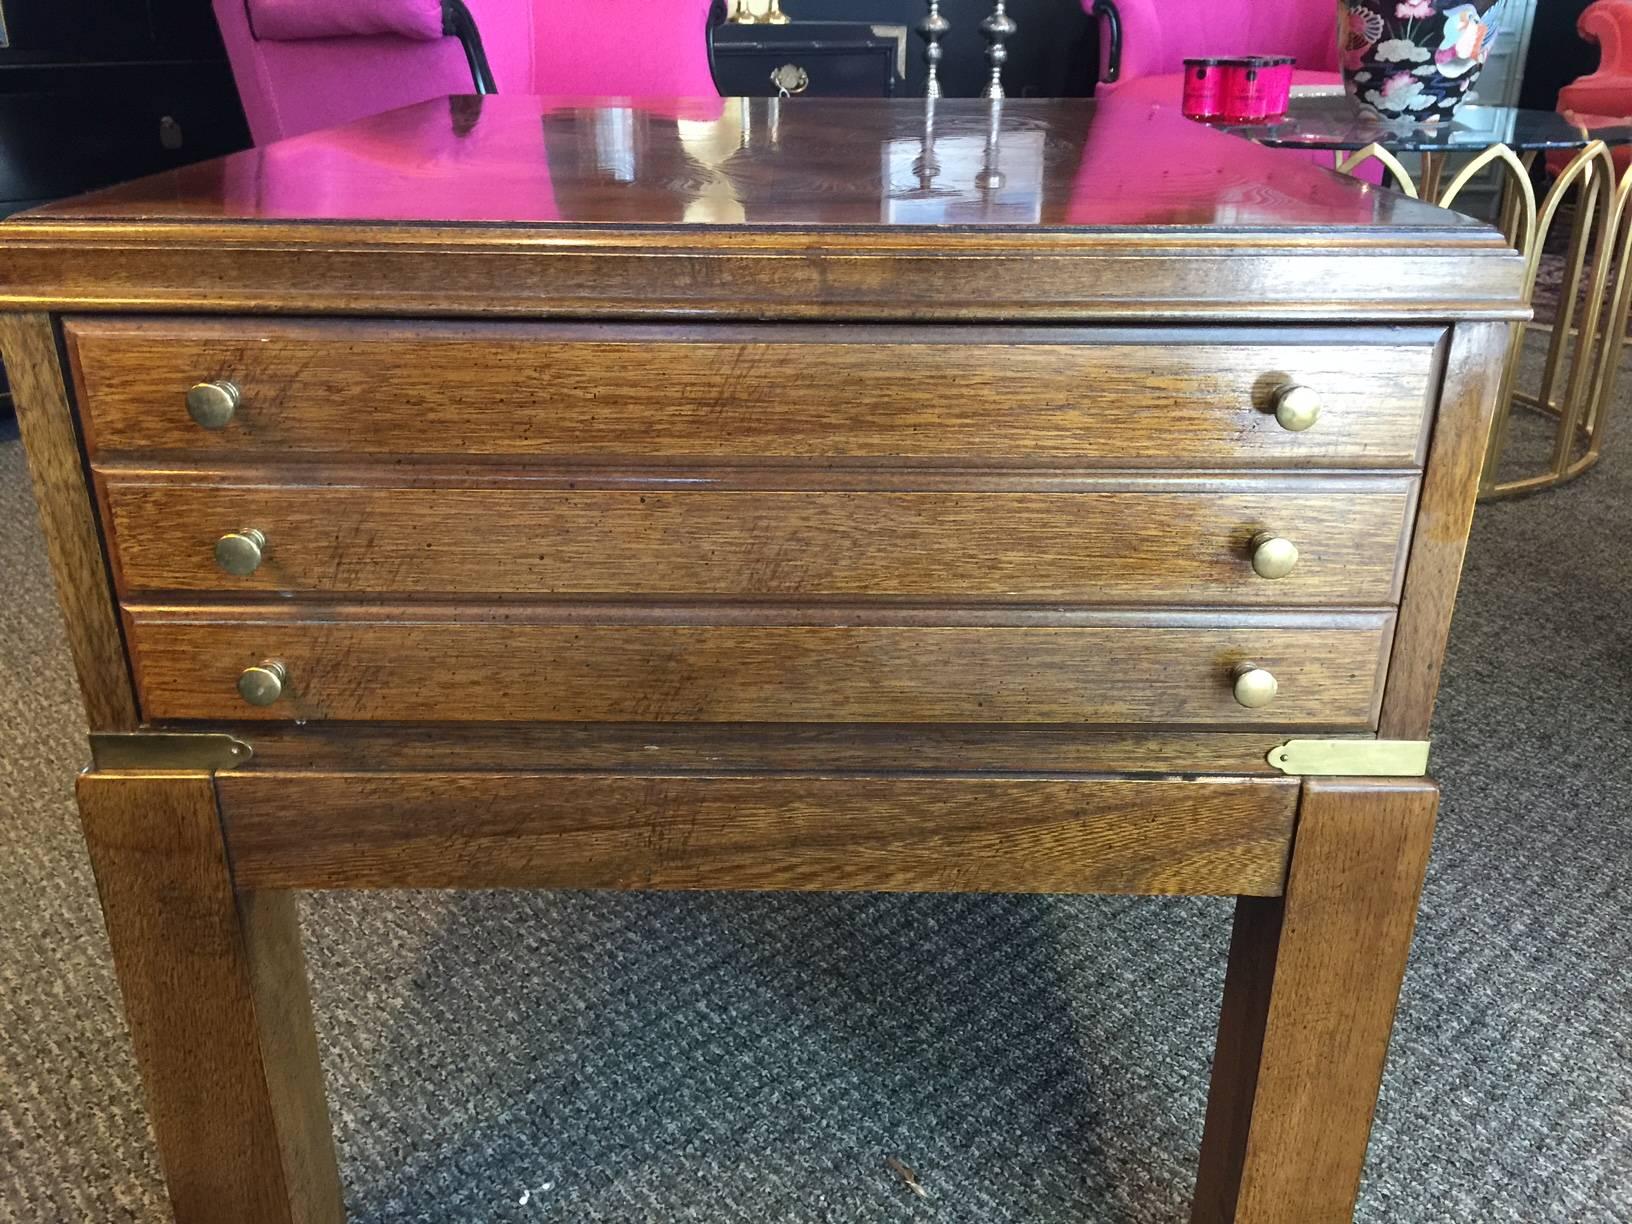 This Mid-Century side table is in excellent vintage condition with a beautiful burled top, a single drawer and brass corner fittings and feet.